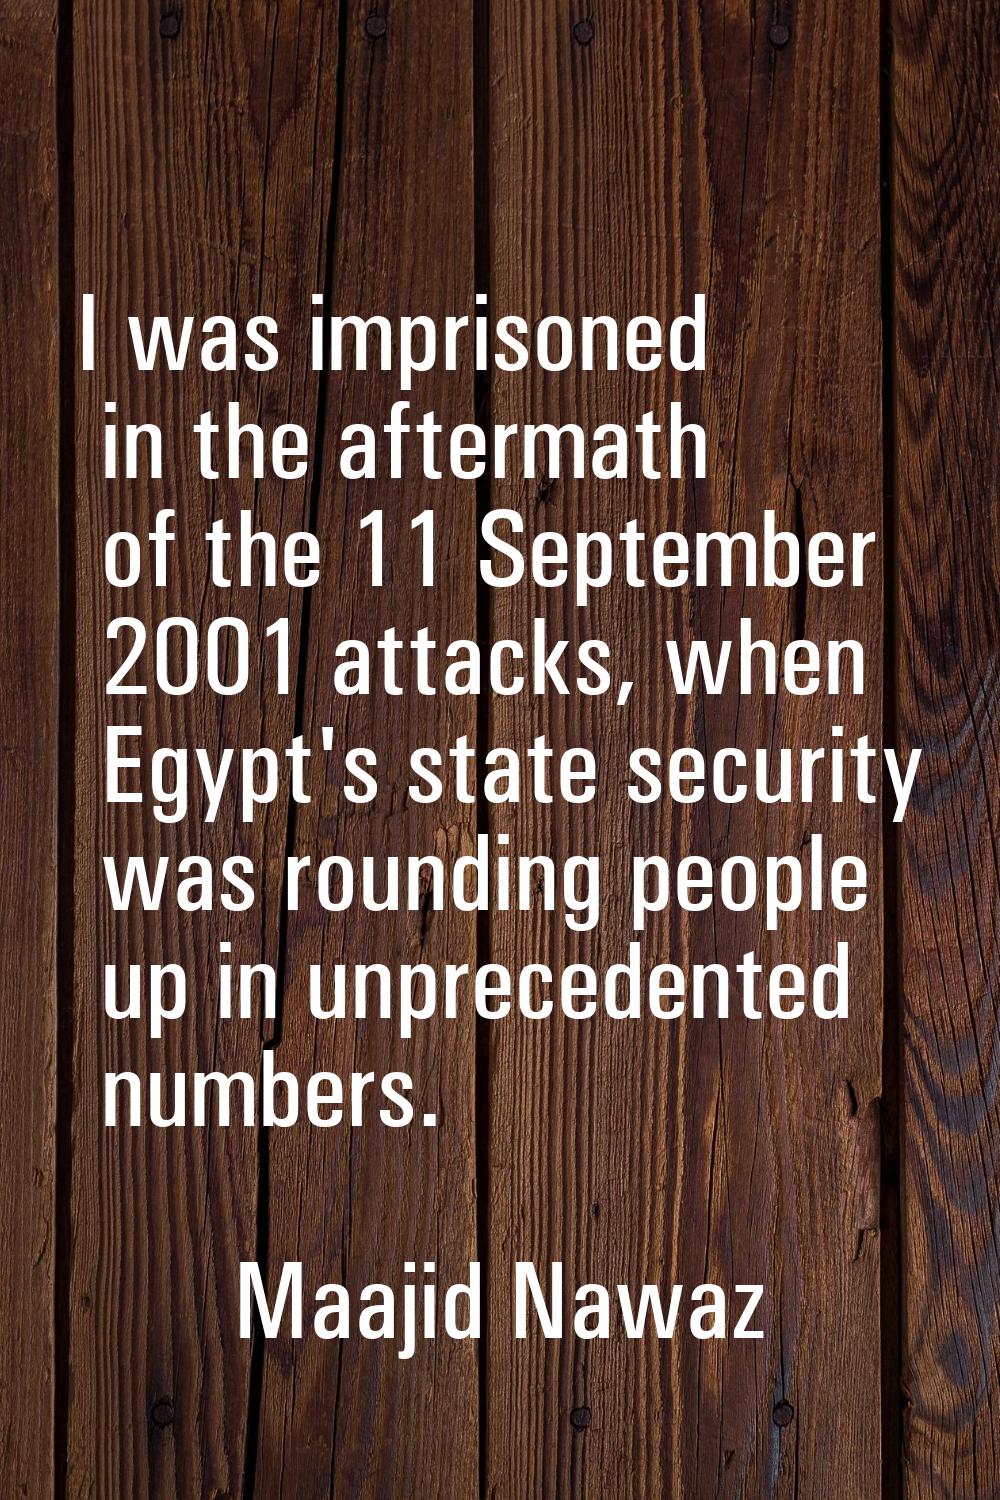 I was imprisoned in the aftermath of the 11 September 2001 attacks, when Egypt's state security was